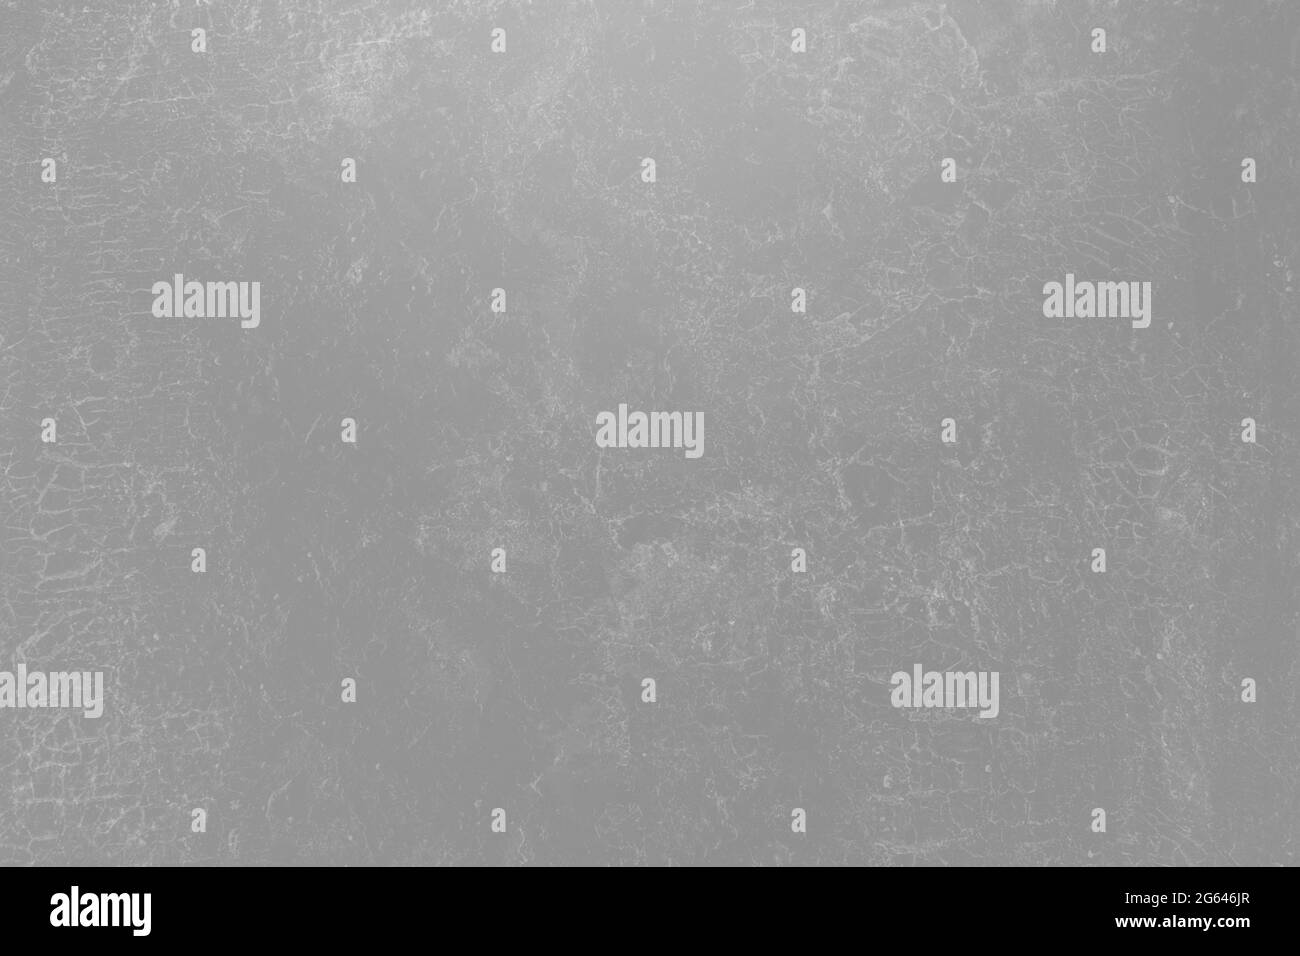 A Monochrone Rocky Textured Background for Various Uses Including ...